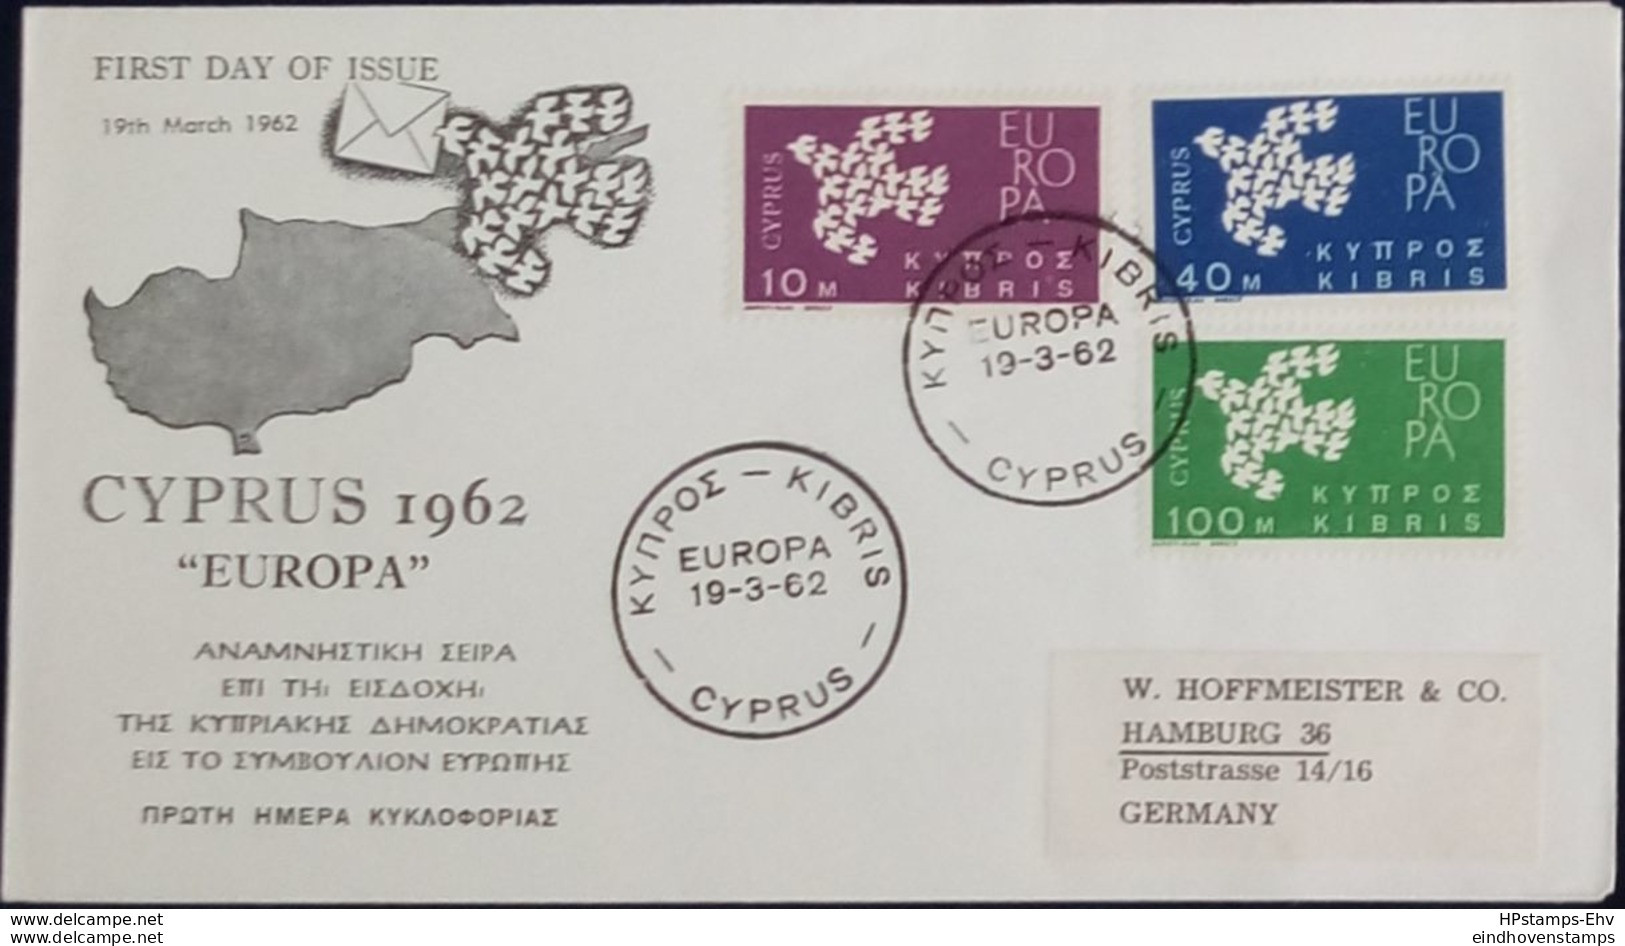 Cyprus 1962 Cept Issue FDC - 1962